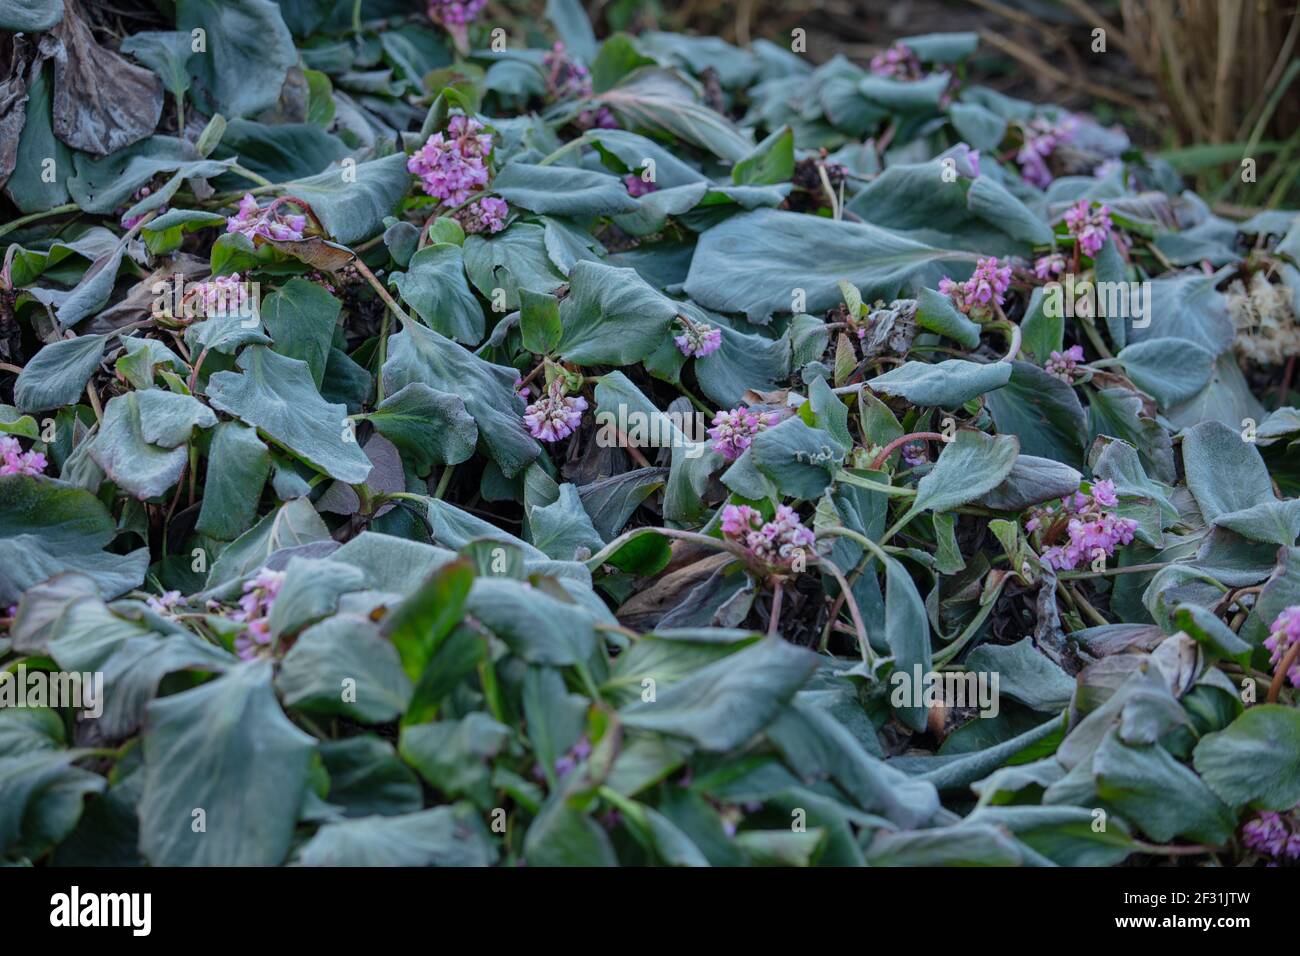 Early morning frost seen on the leaves and flowers of Bergenia cordifolia in the uk in winter. Stock Photo